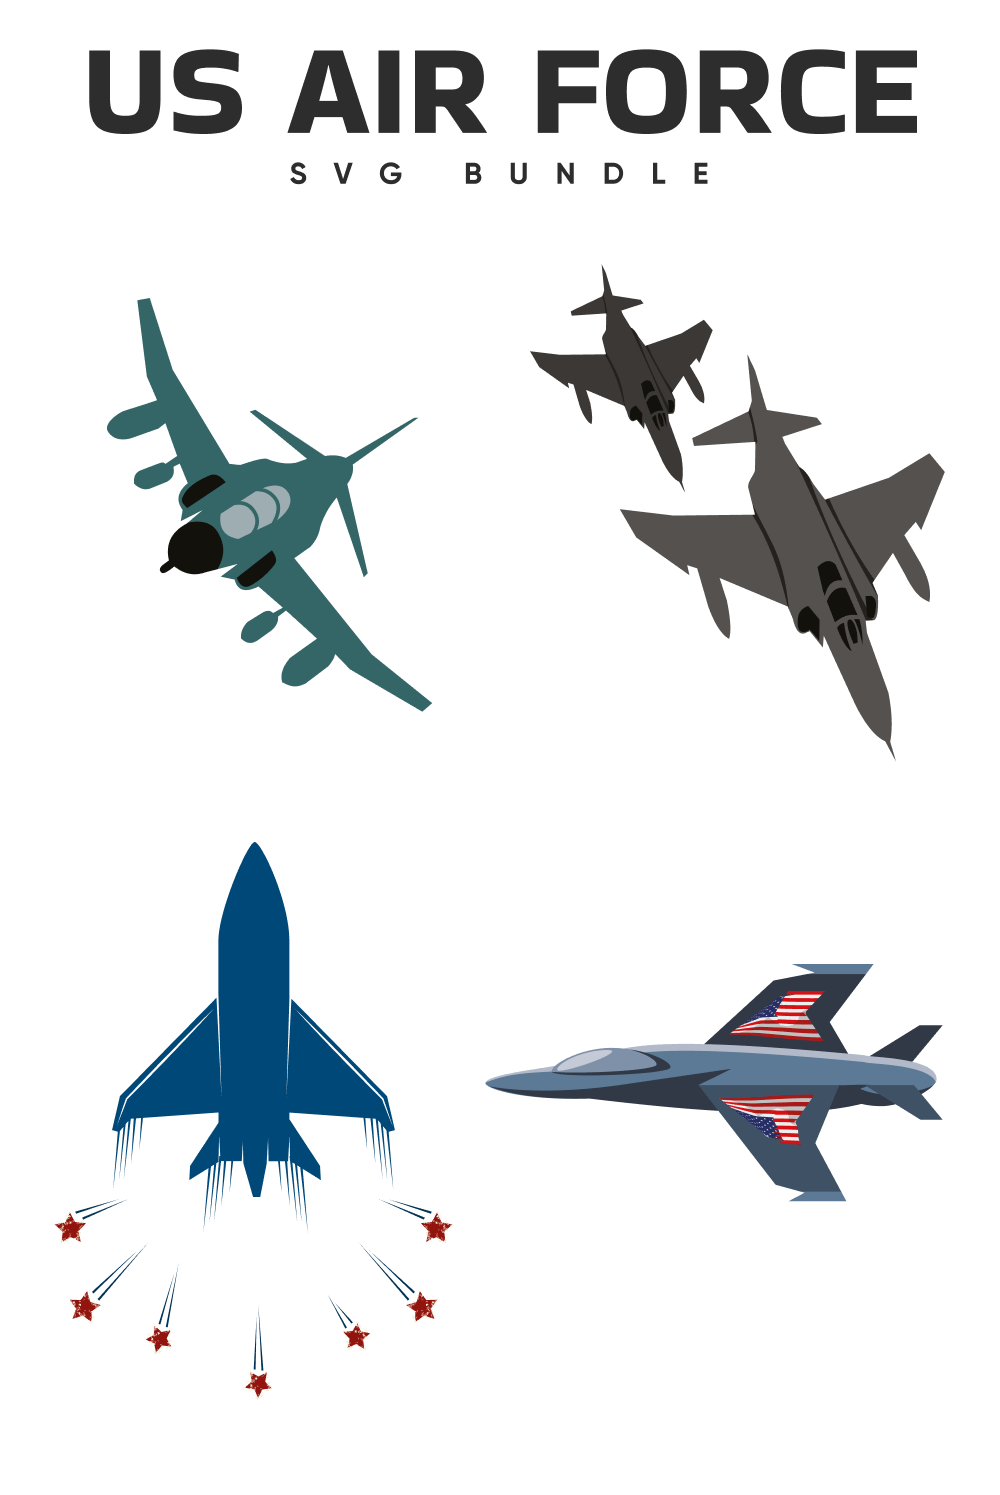 Military planes in blue and gray colors.